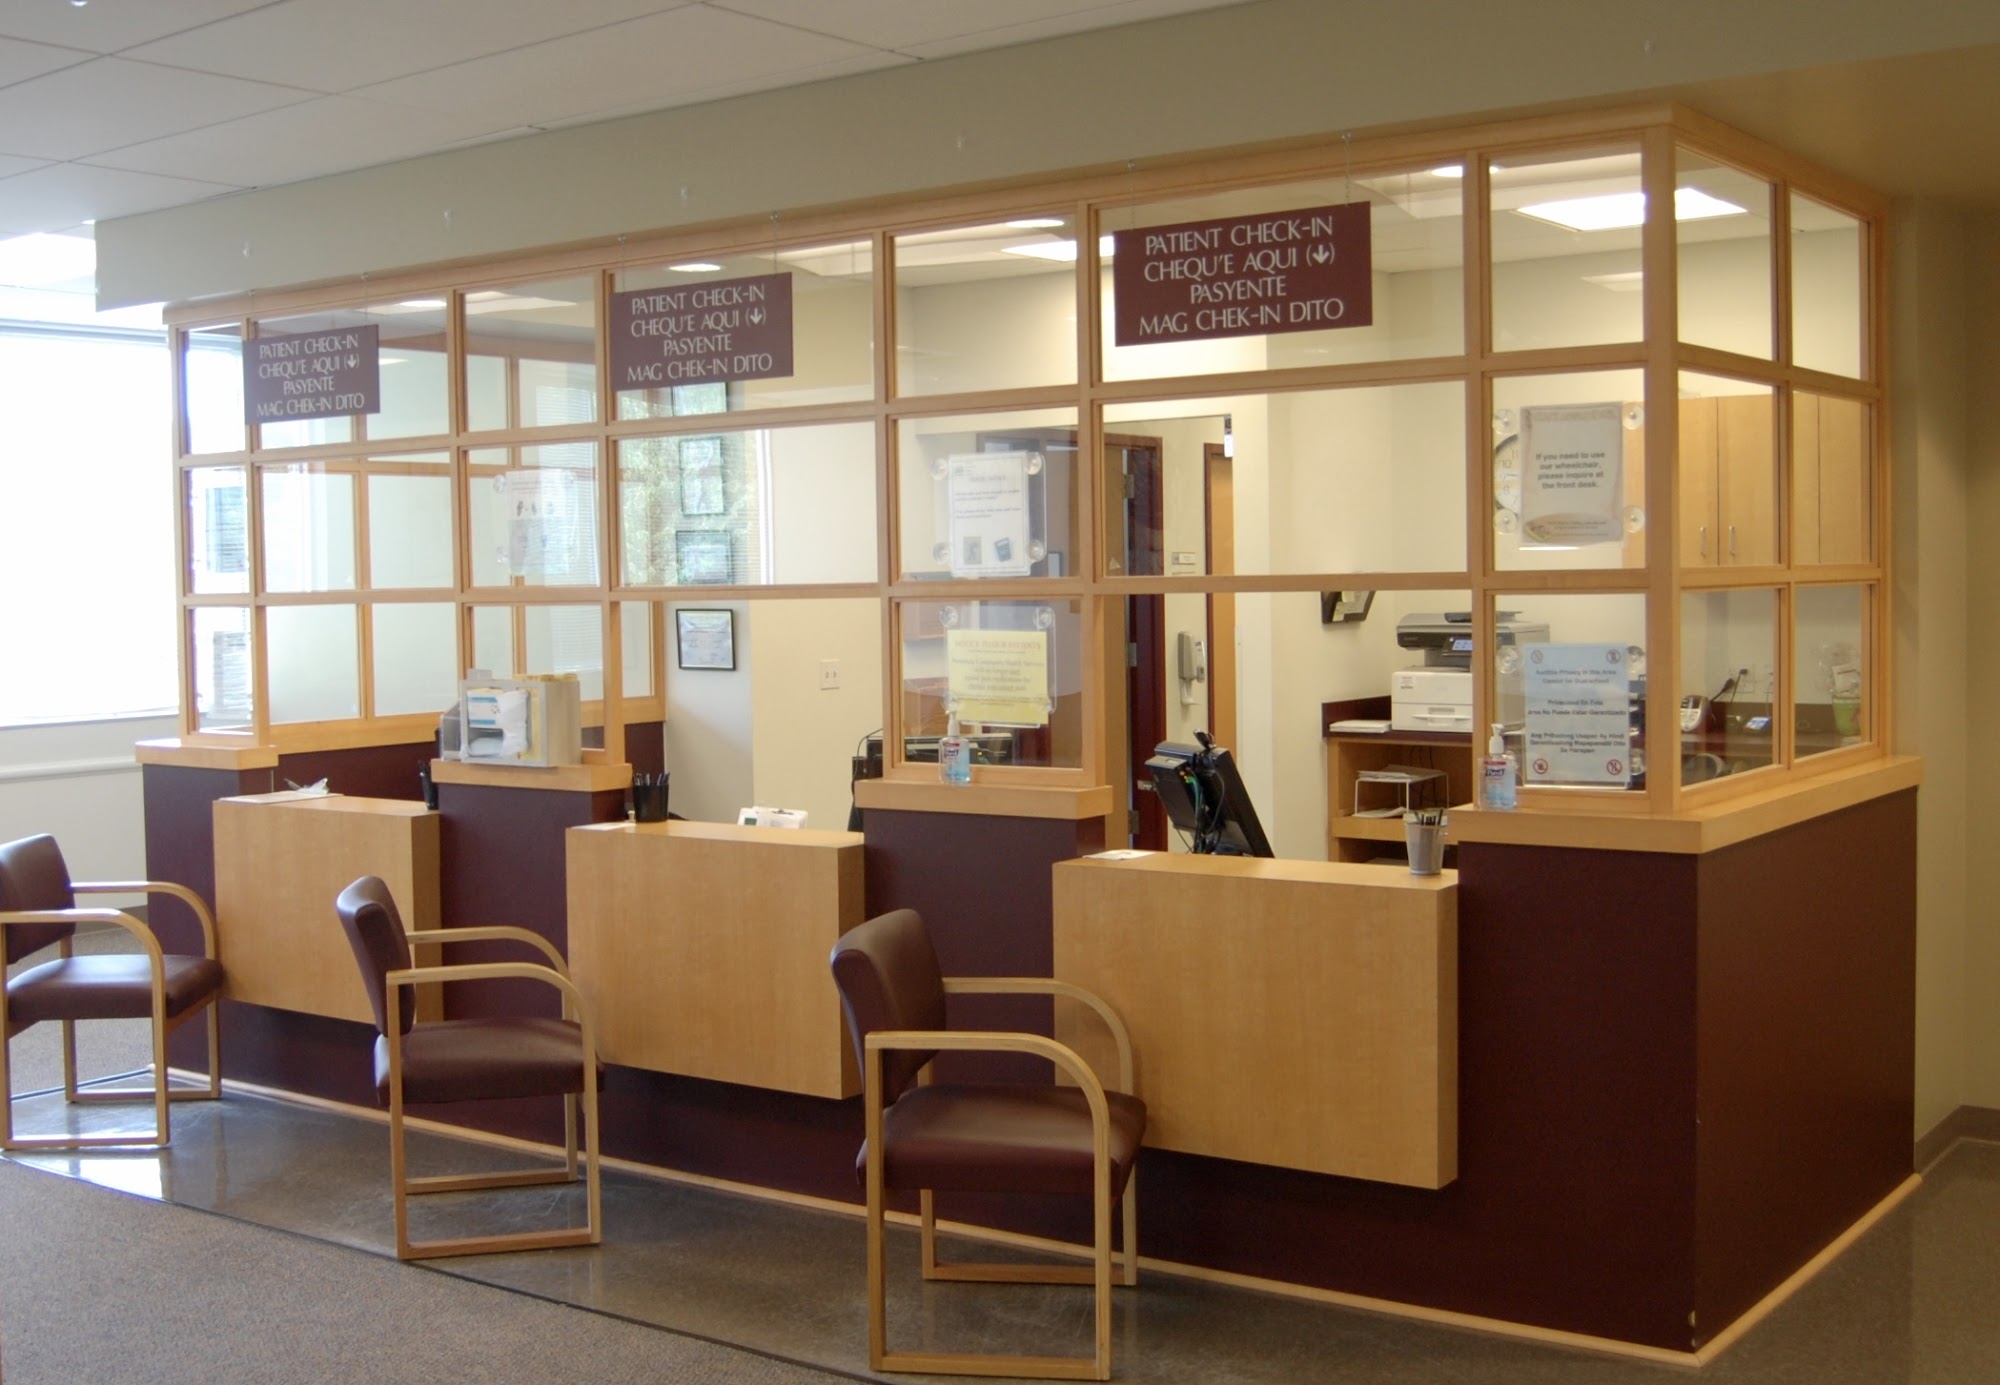 Peninsula Community Health Services - Poulsbo Medical Clinic